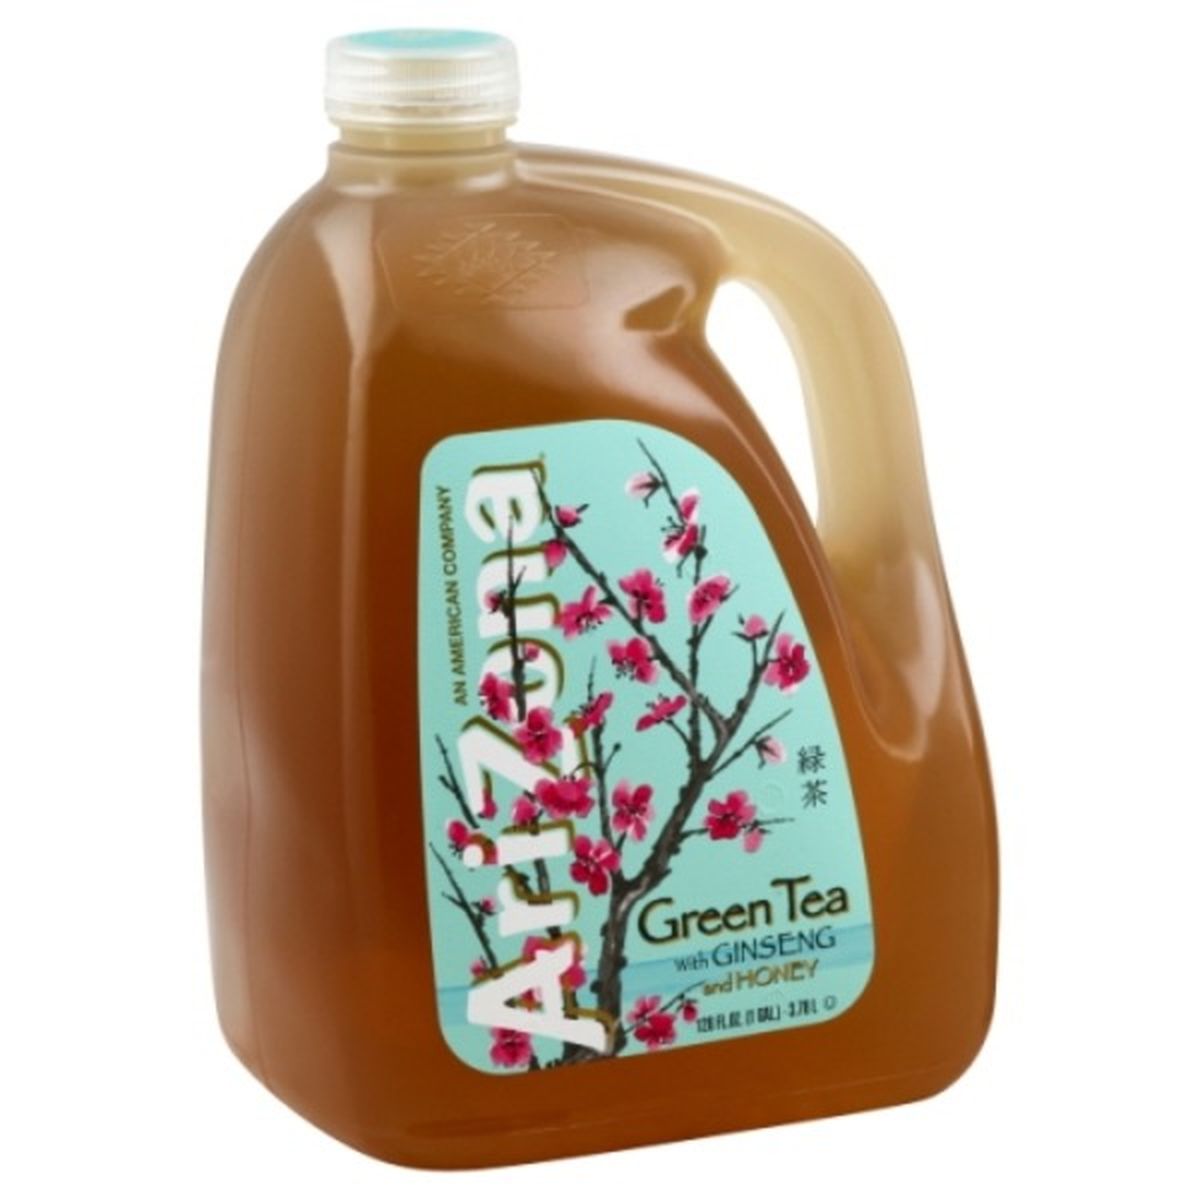 Calories in Arizona Green Tea, with Ginseng and Honey